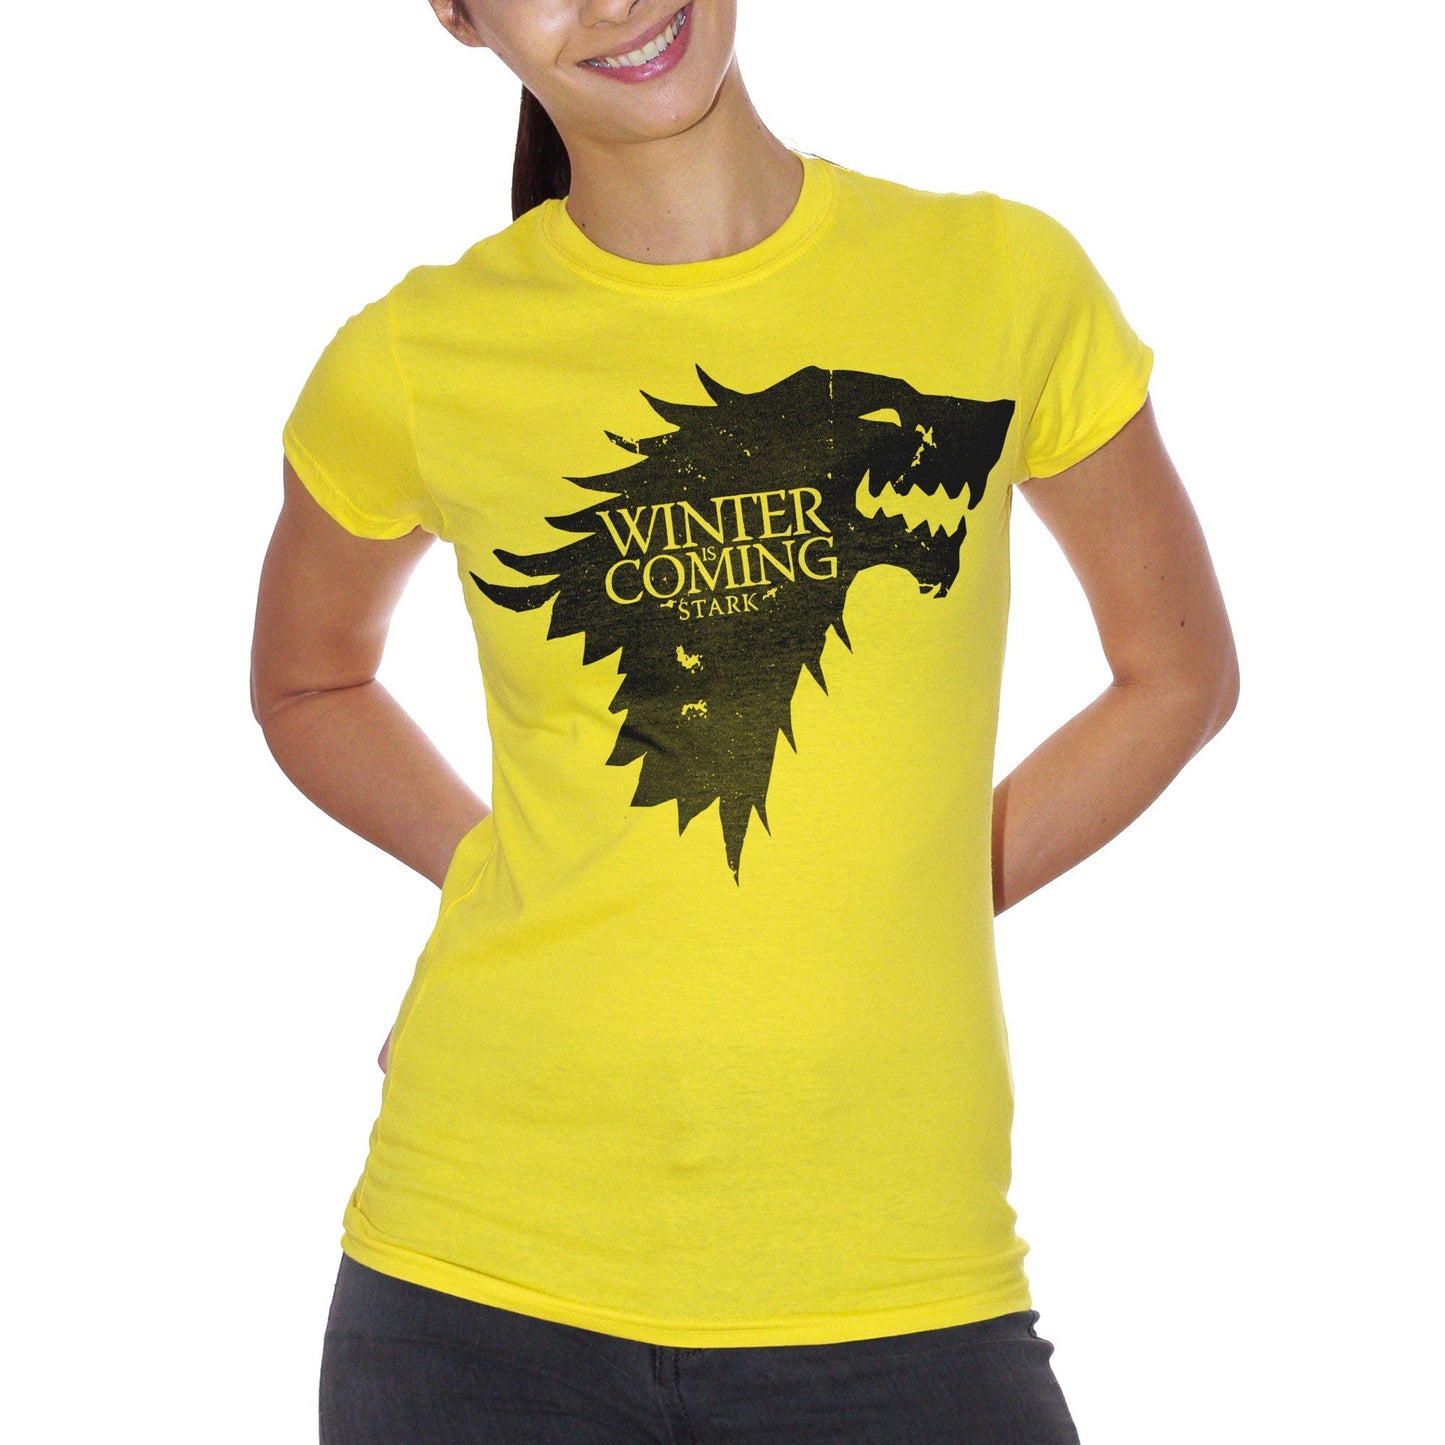 Goldenrod T-Shirt Winter Is Coming Stark Game Of Thrones - FILM Choose ur color CucShop